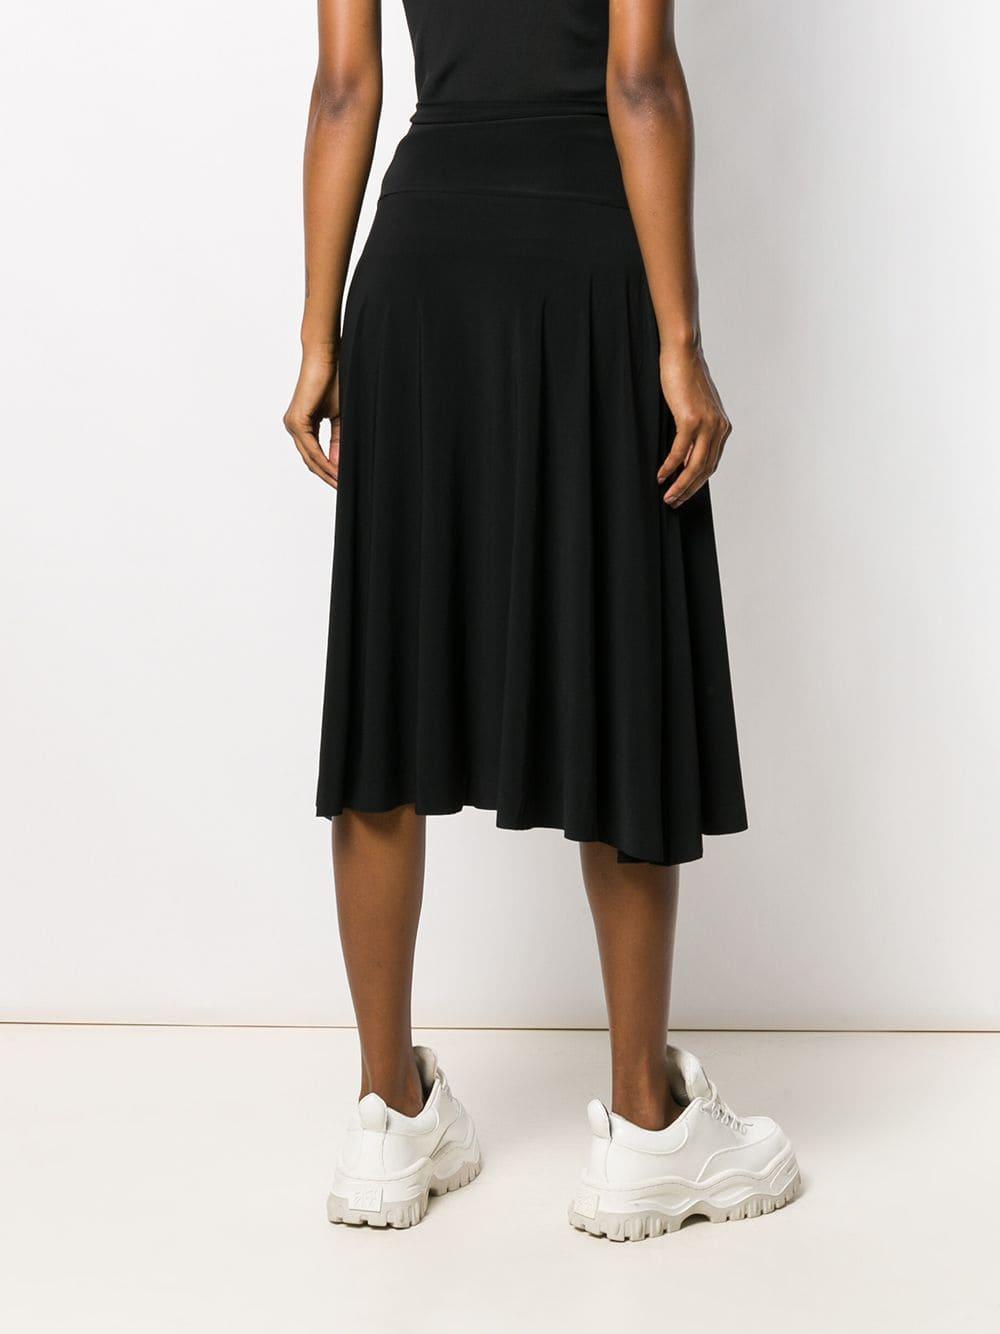 Norma Kamali Synthetic Flared Midi Skirt in Black - Save 28% - Lyst